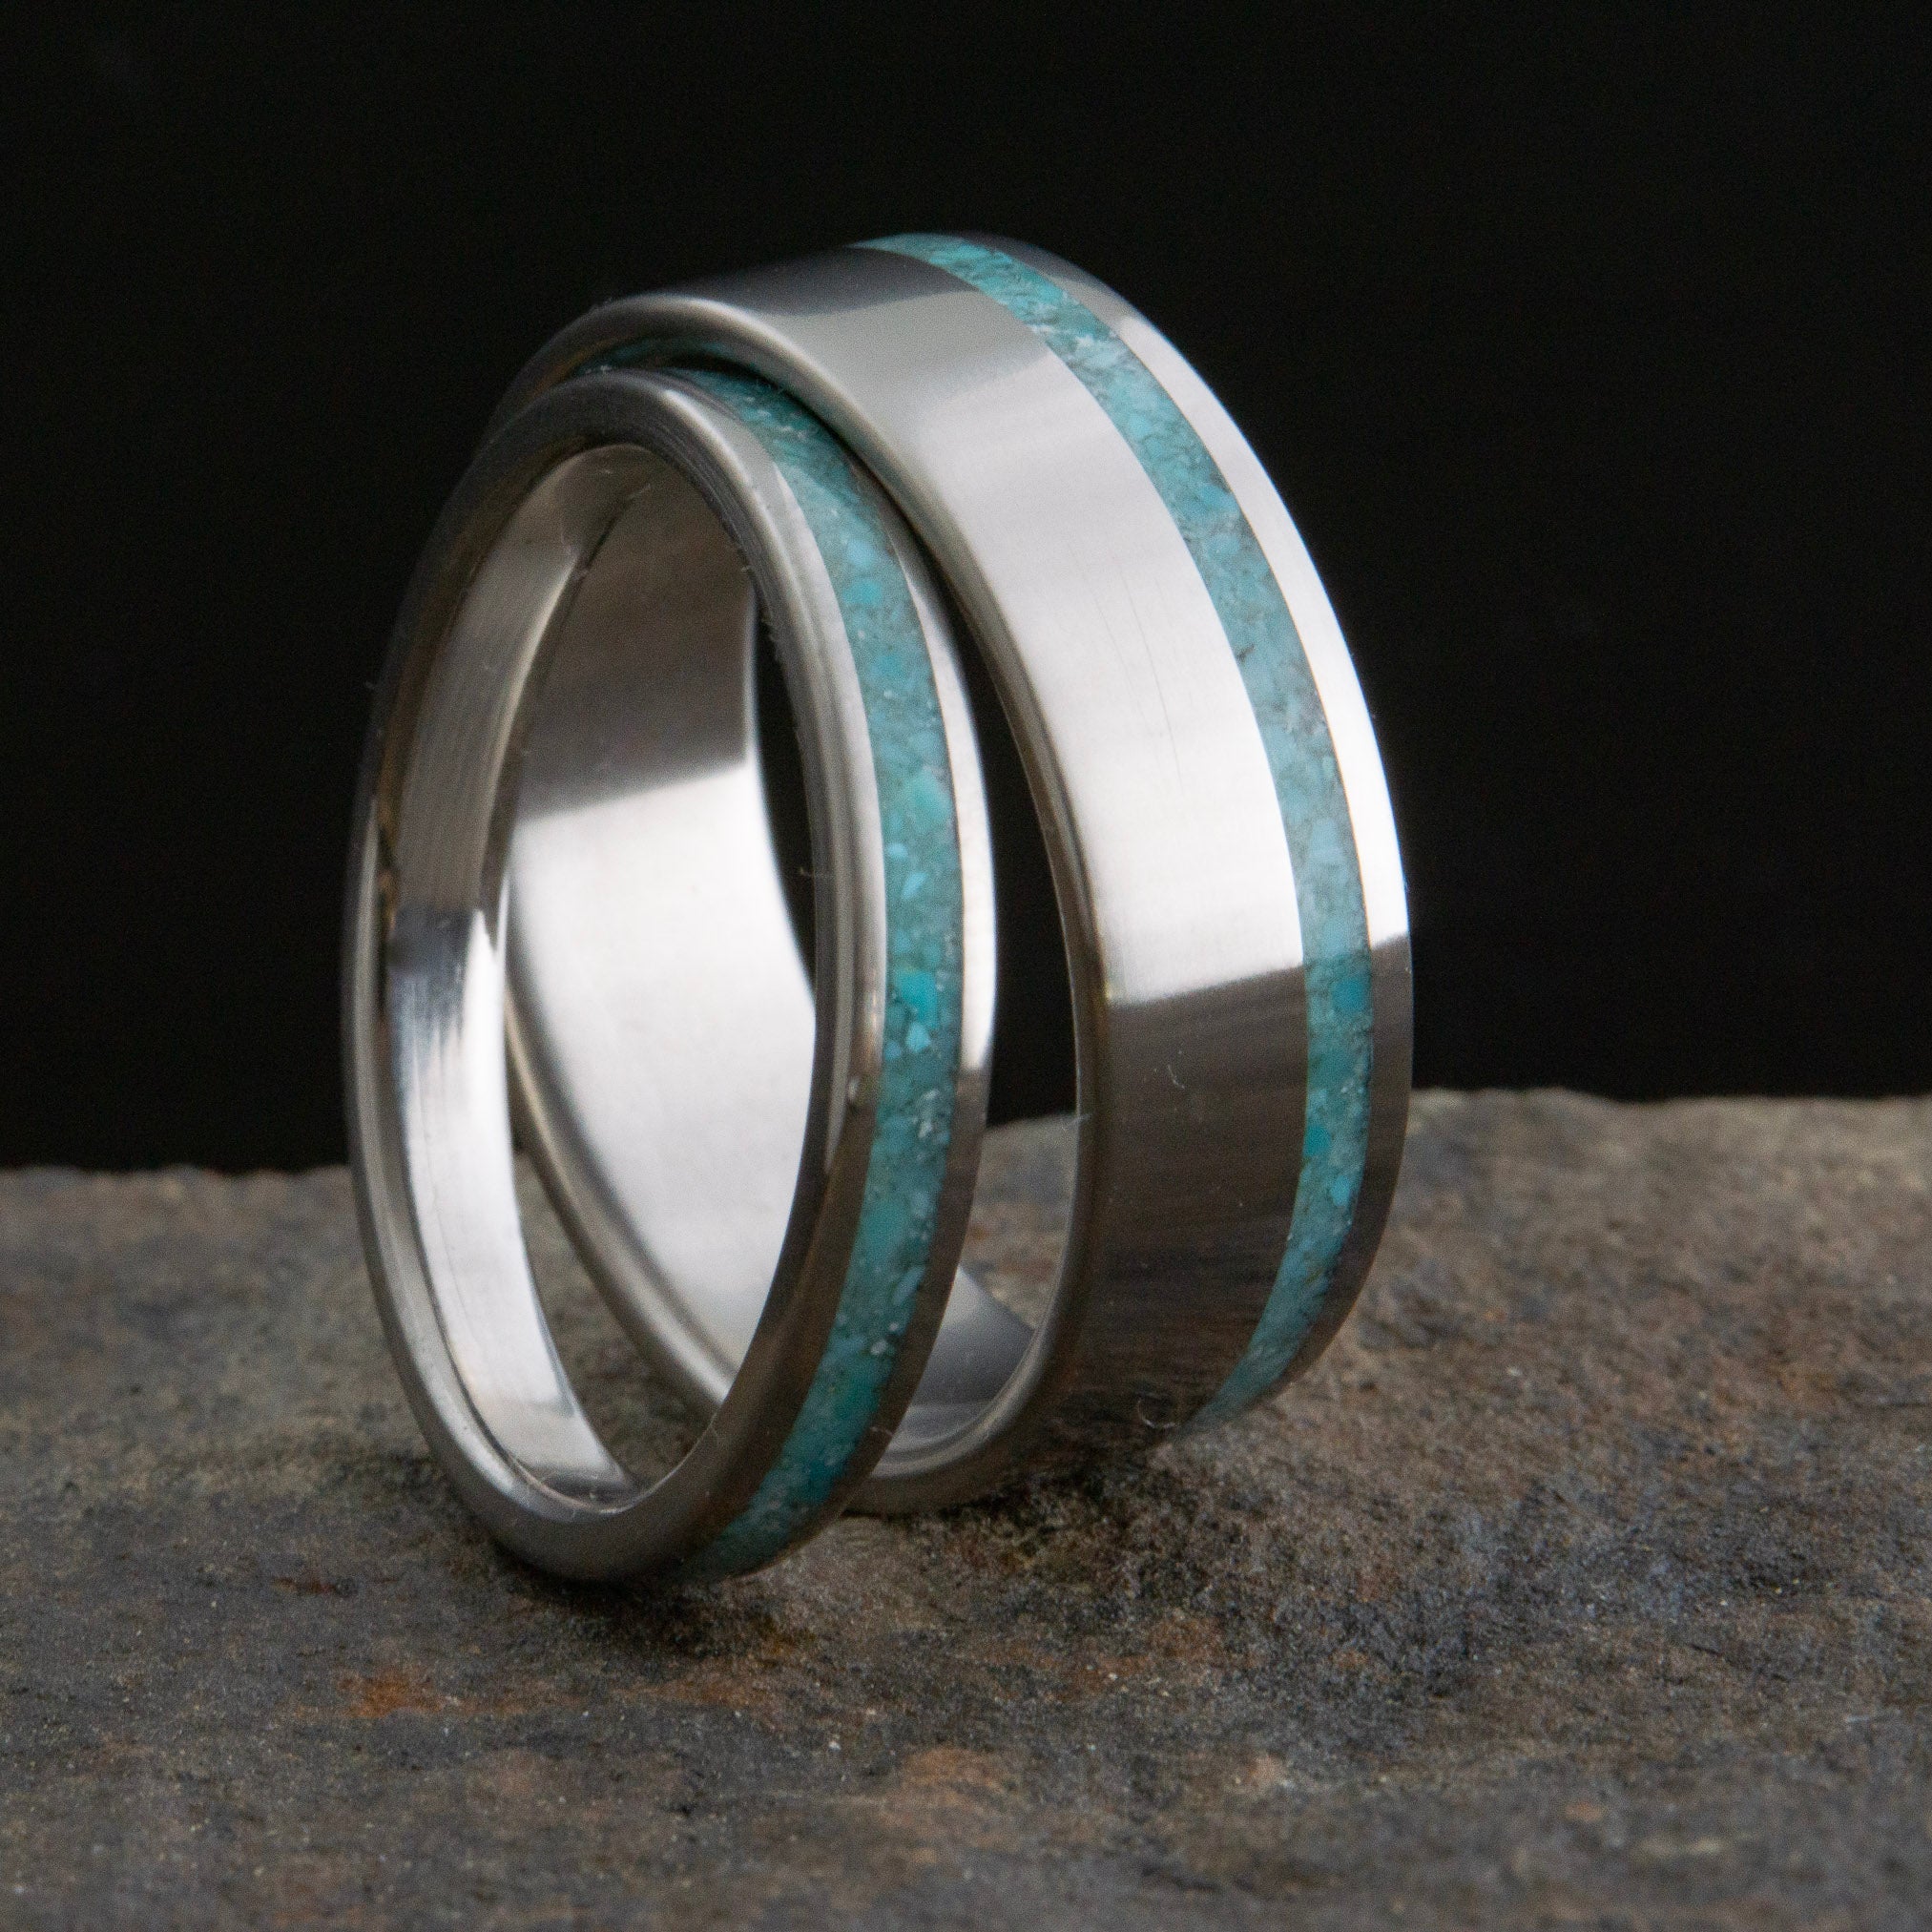 Turquoise and Titanium His and Hers Wedding band set